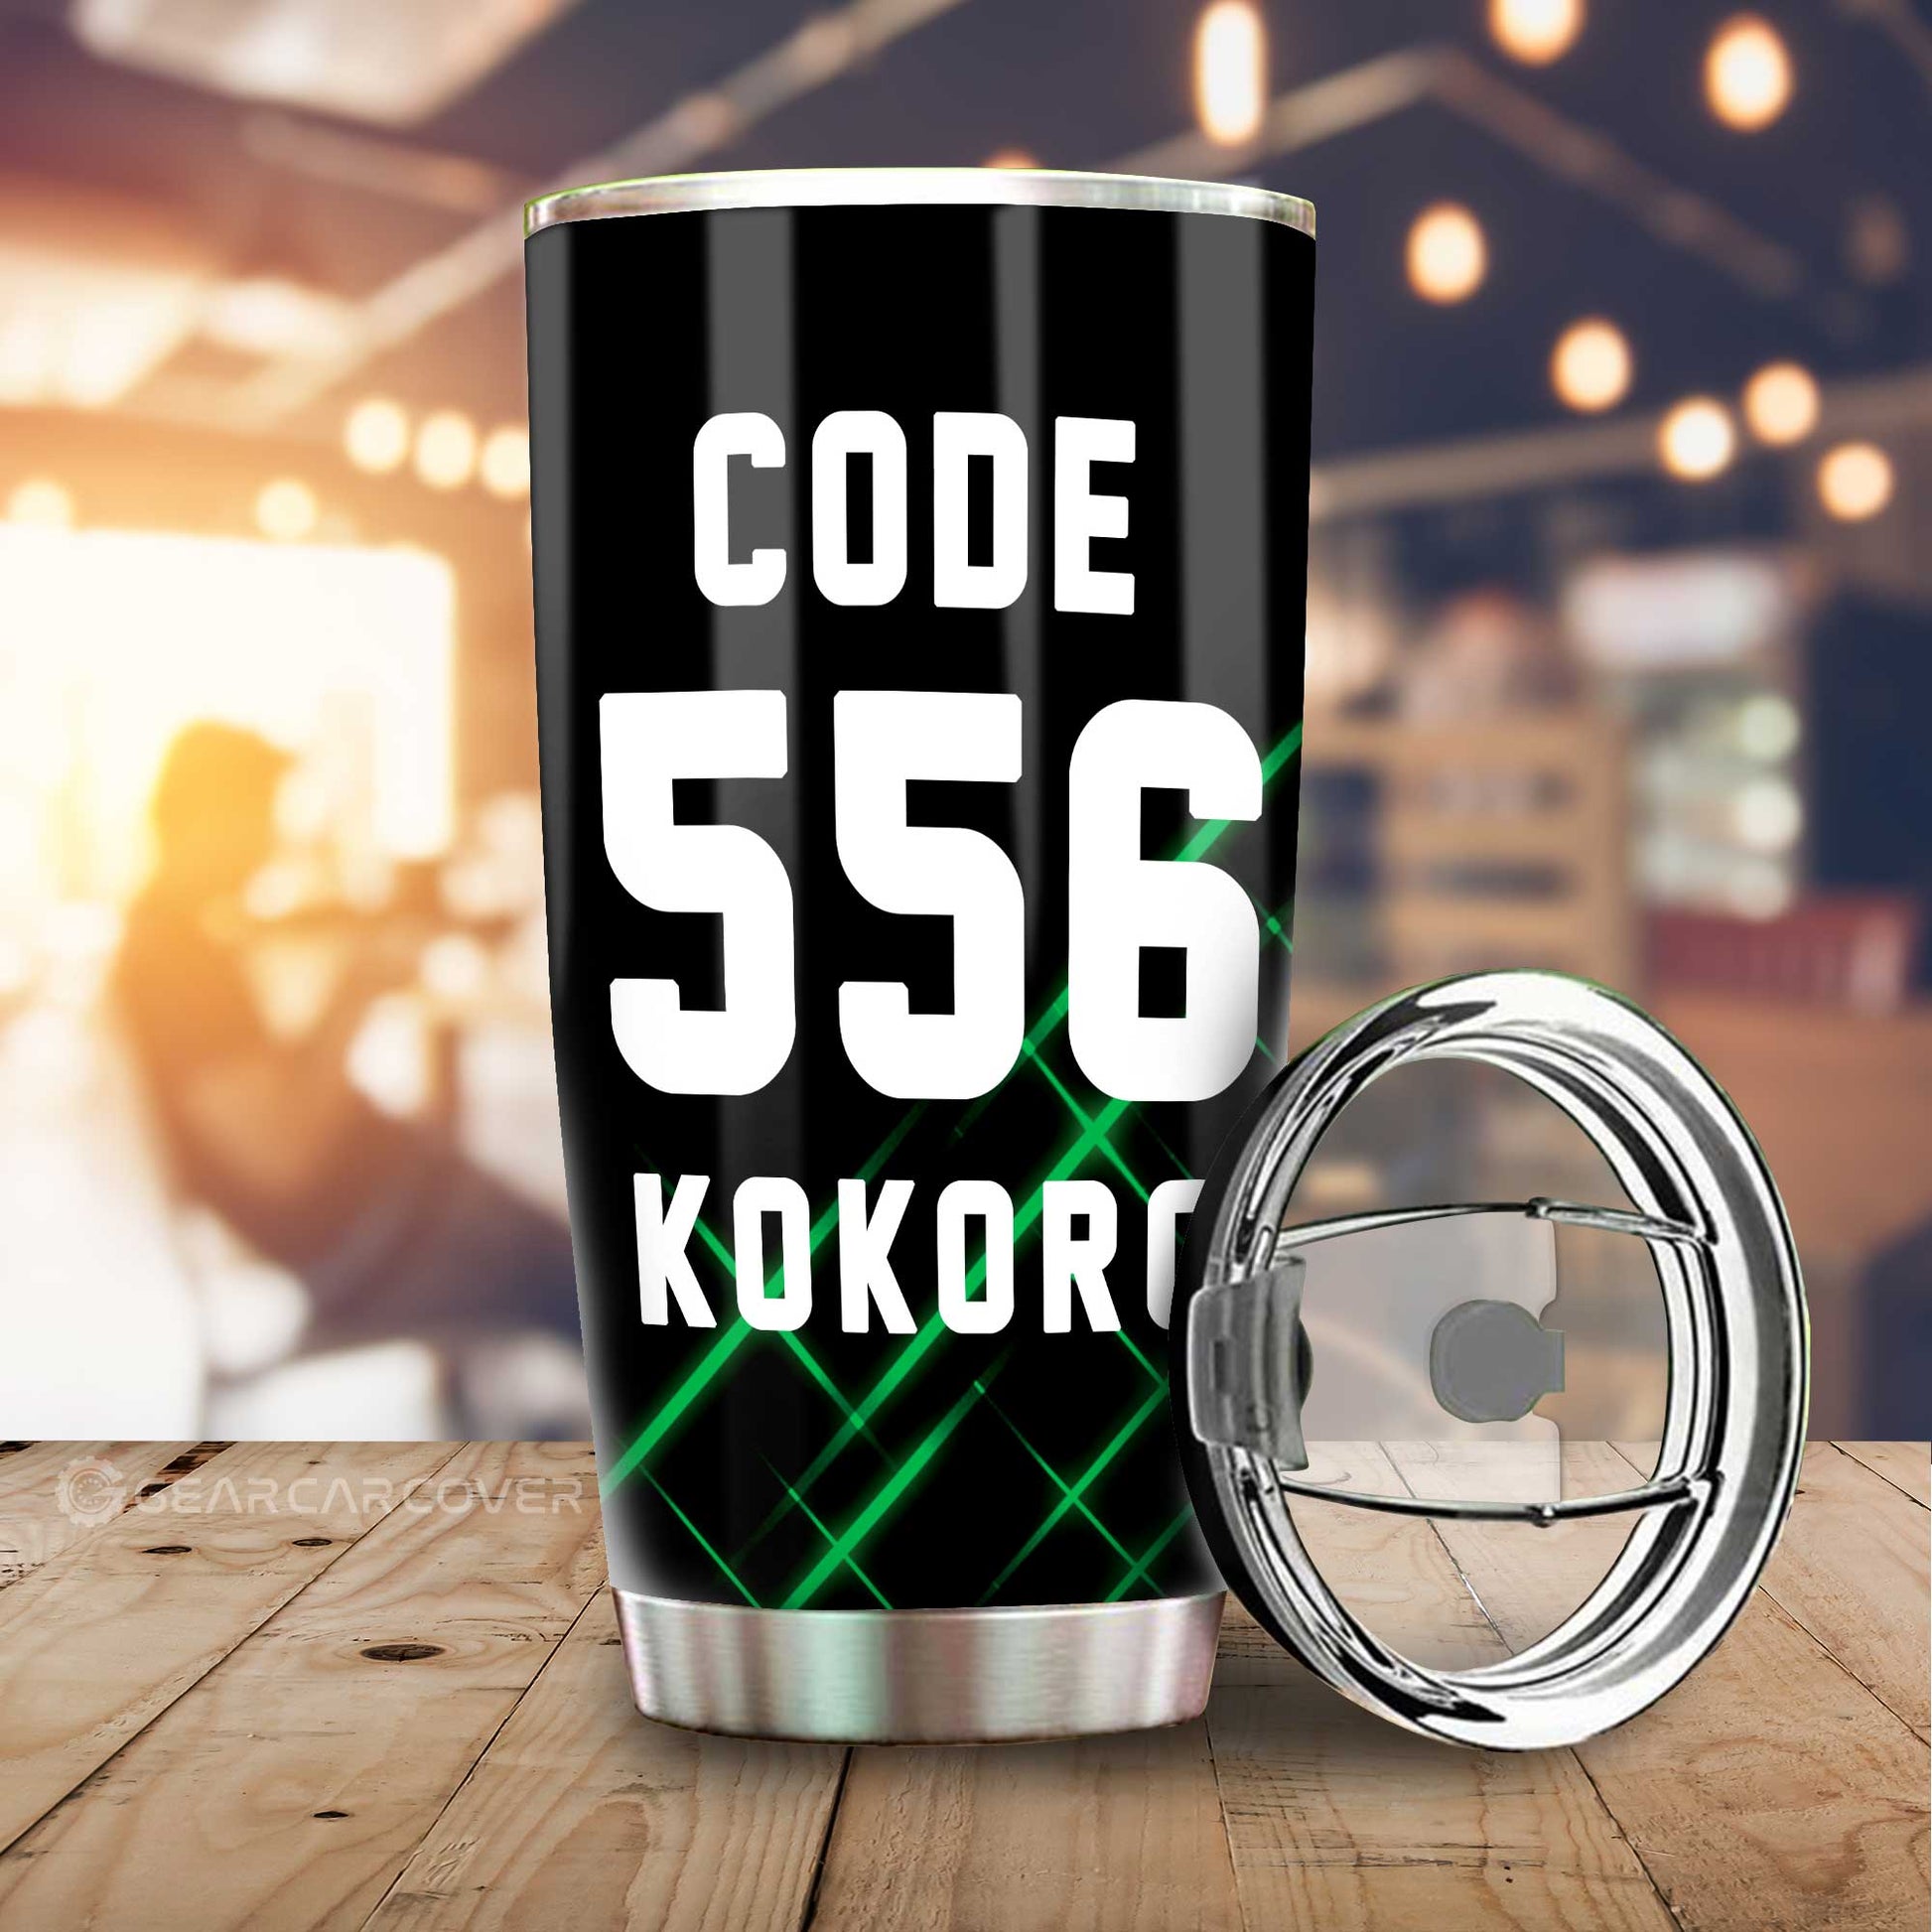 Code:556 Kokoro Tumbler Cup Custom DARLING In The FRANXX Anime Car Accessories - Gearcarcover - 2